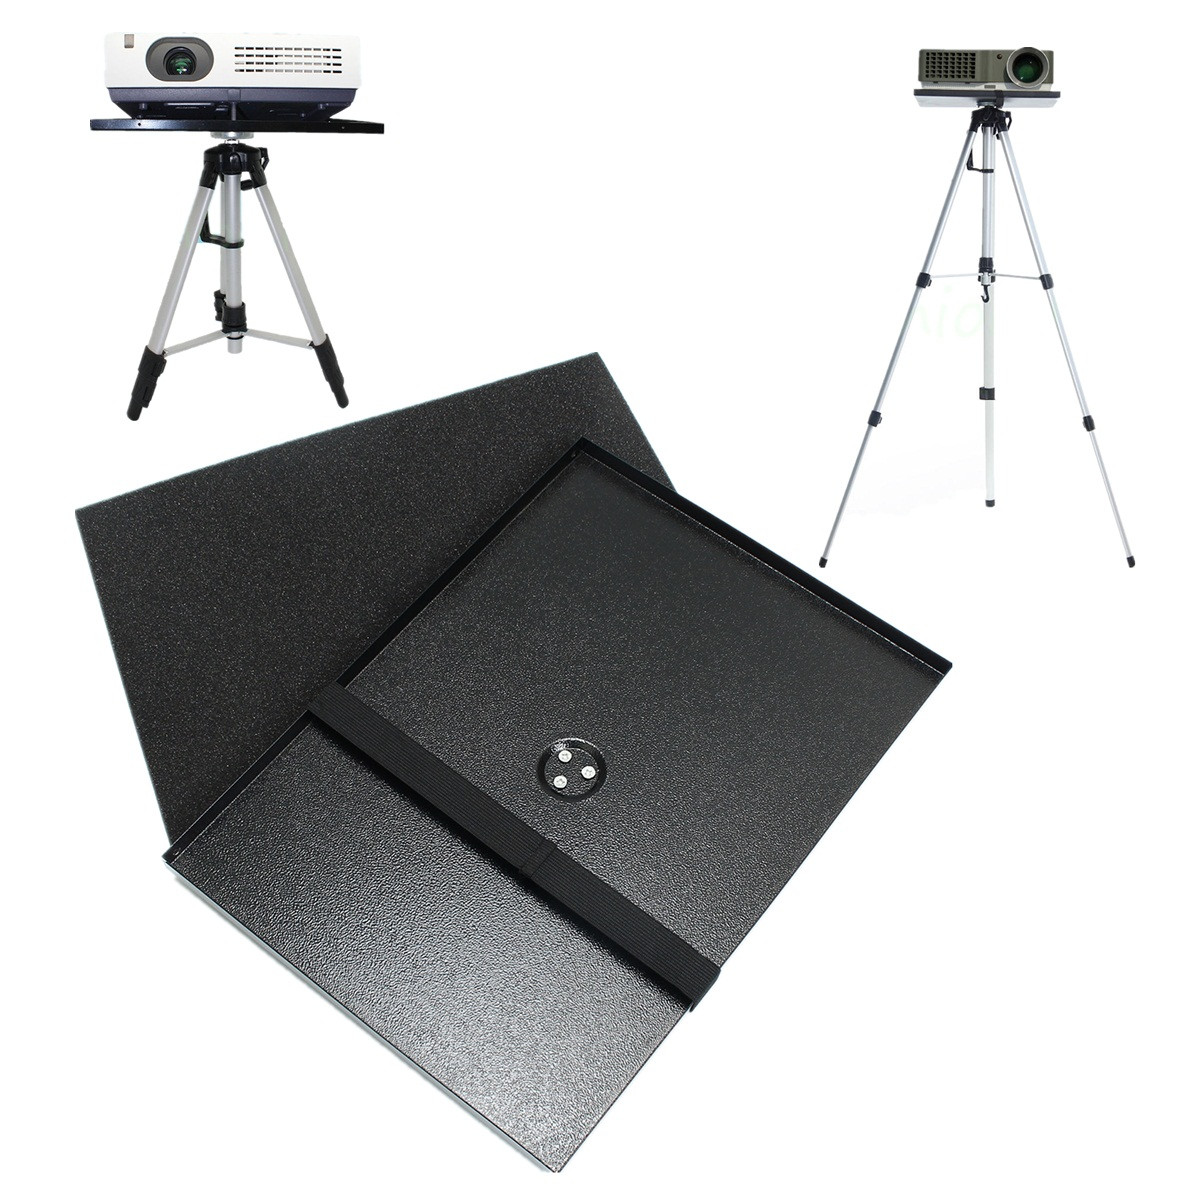 7-inch-to-15-inch-Metal-Laptop-PC-Projector-Tray-Holder-for-14-inch-38-inch-Screw-Tripod-Stand-1125040